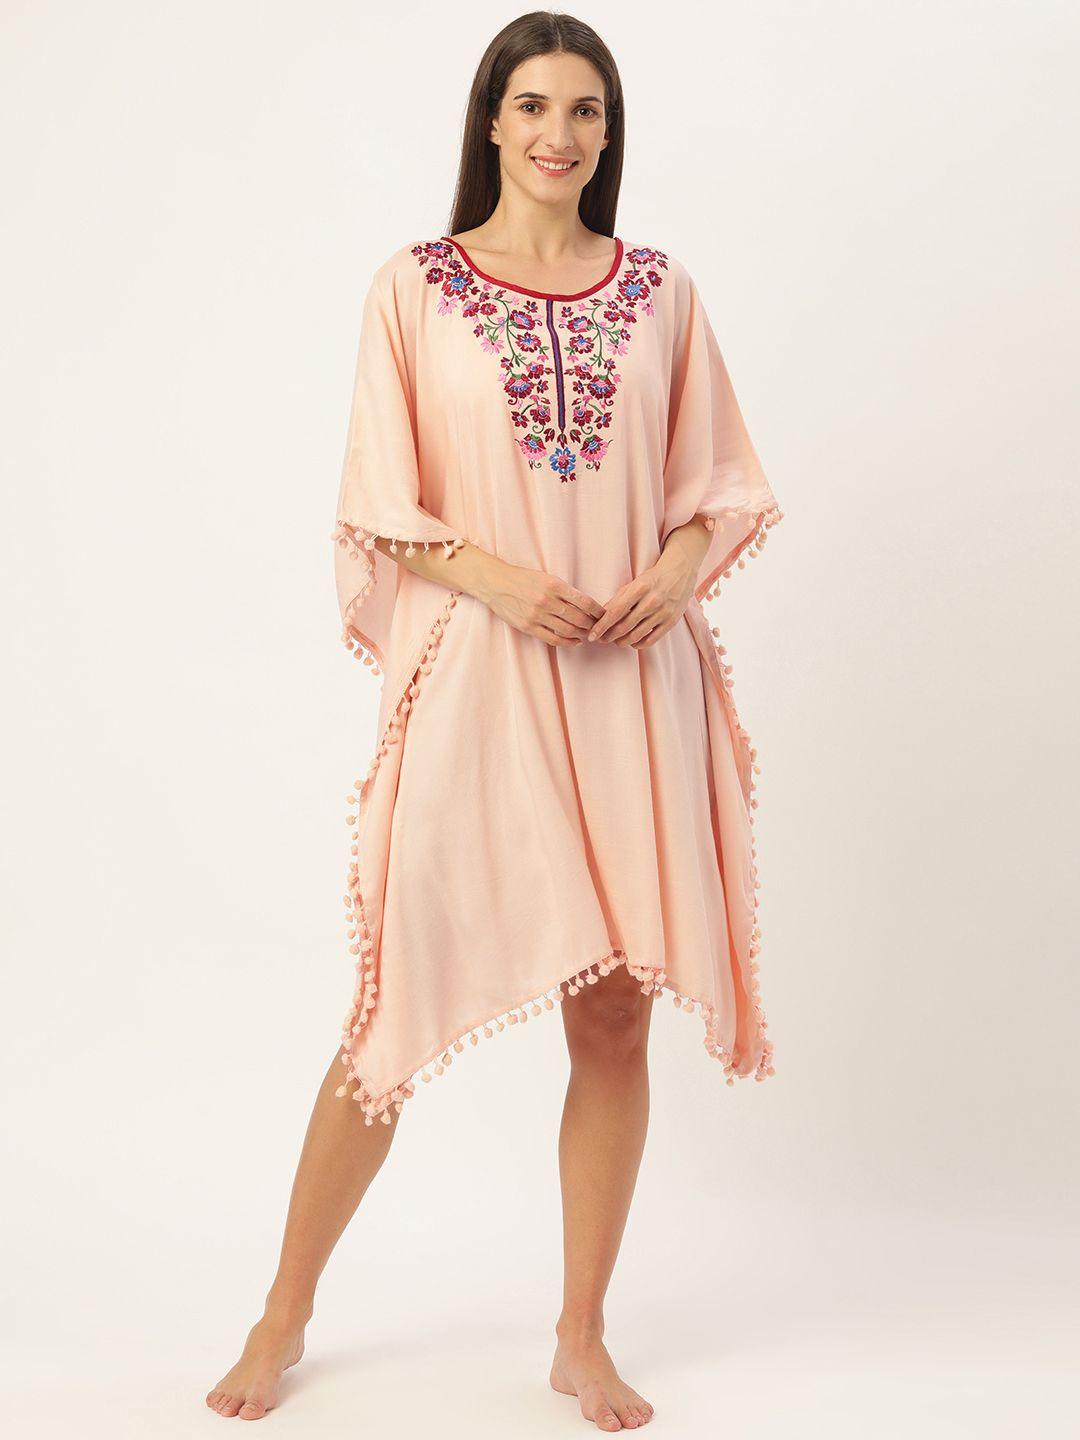 galypso-pink-embroidered-nightdress-with-pom-pom-detail